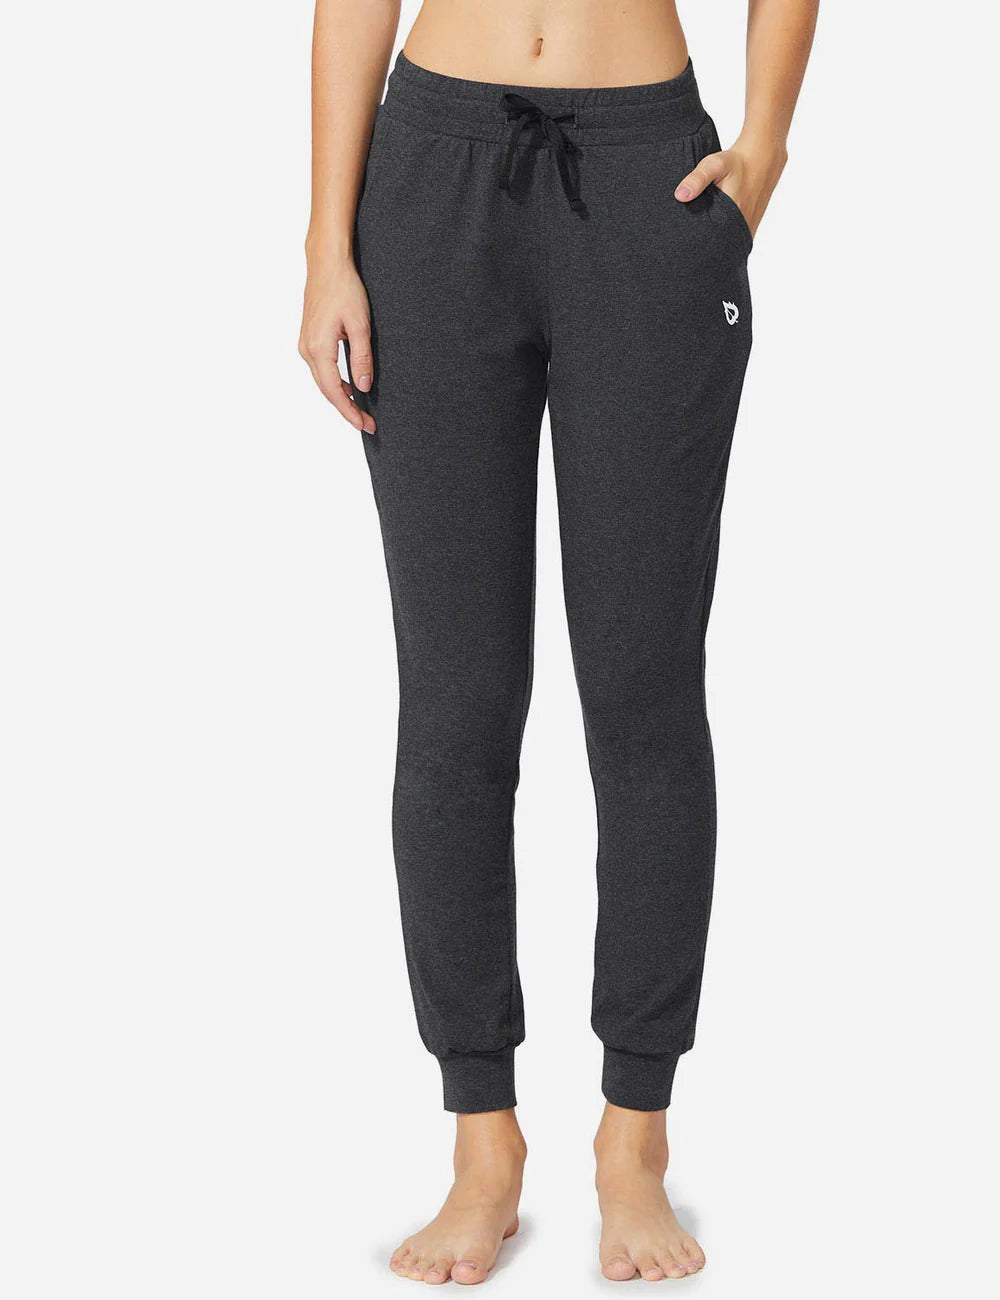 The Best Joggers for Women for Every Body Type and Activity – Baleaf Sports